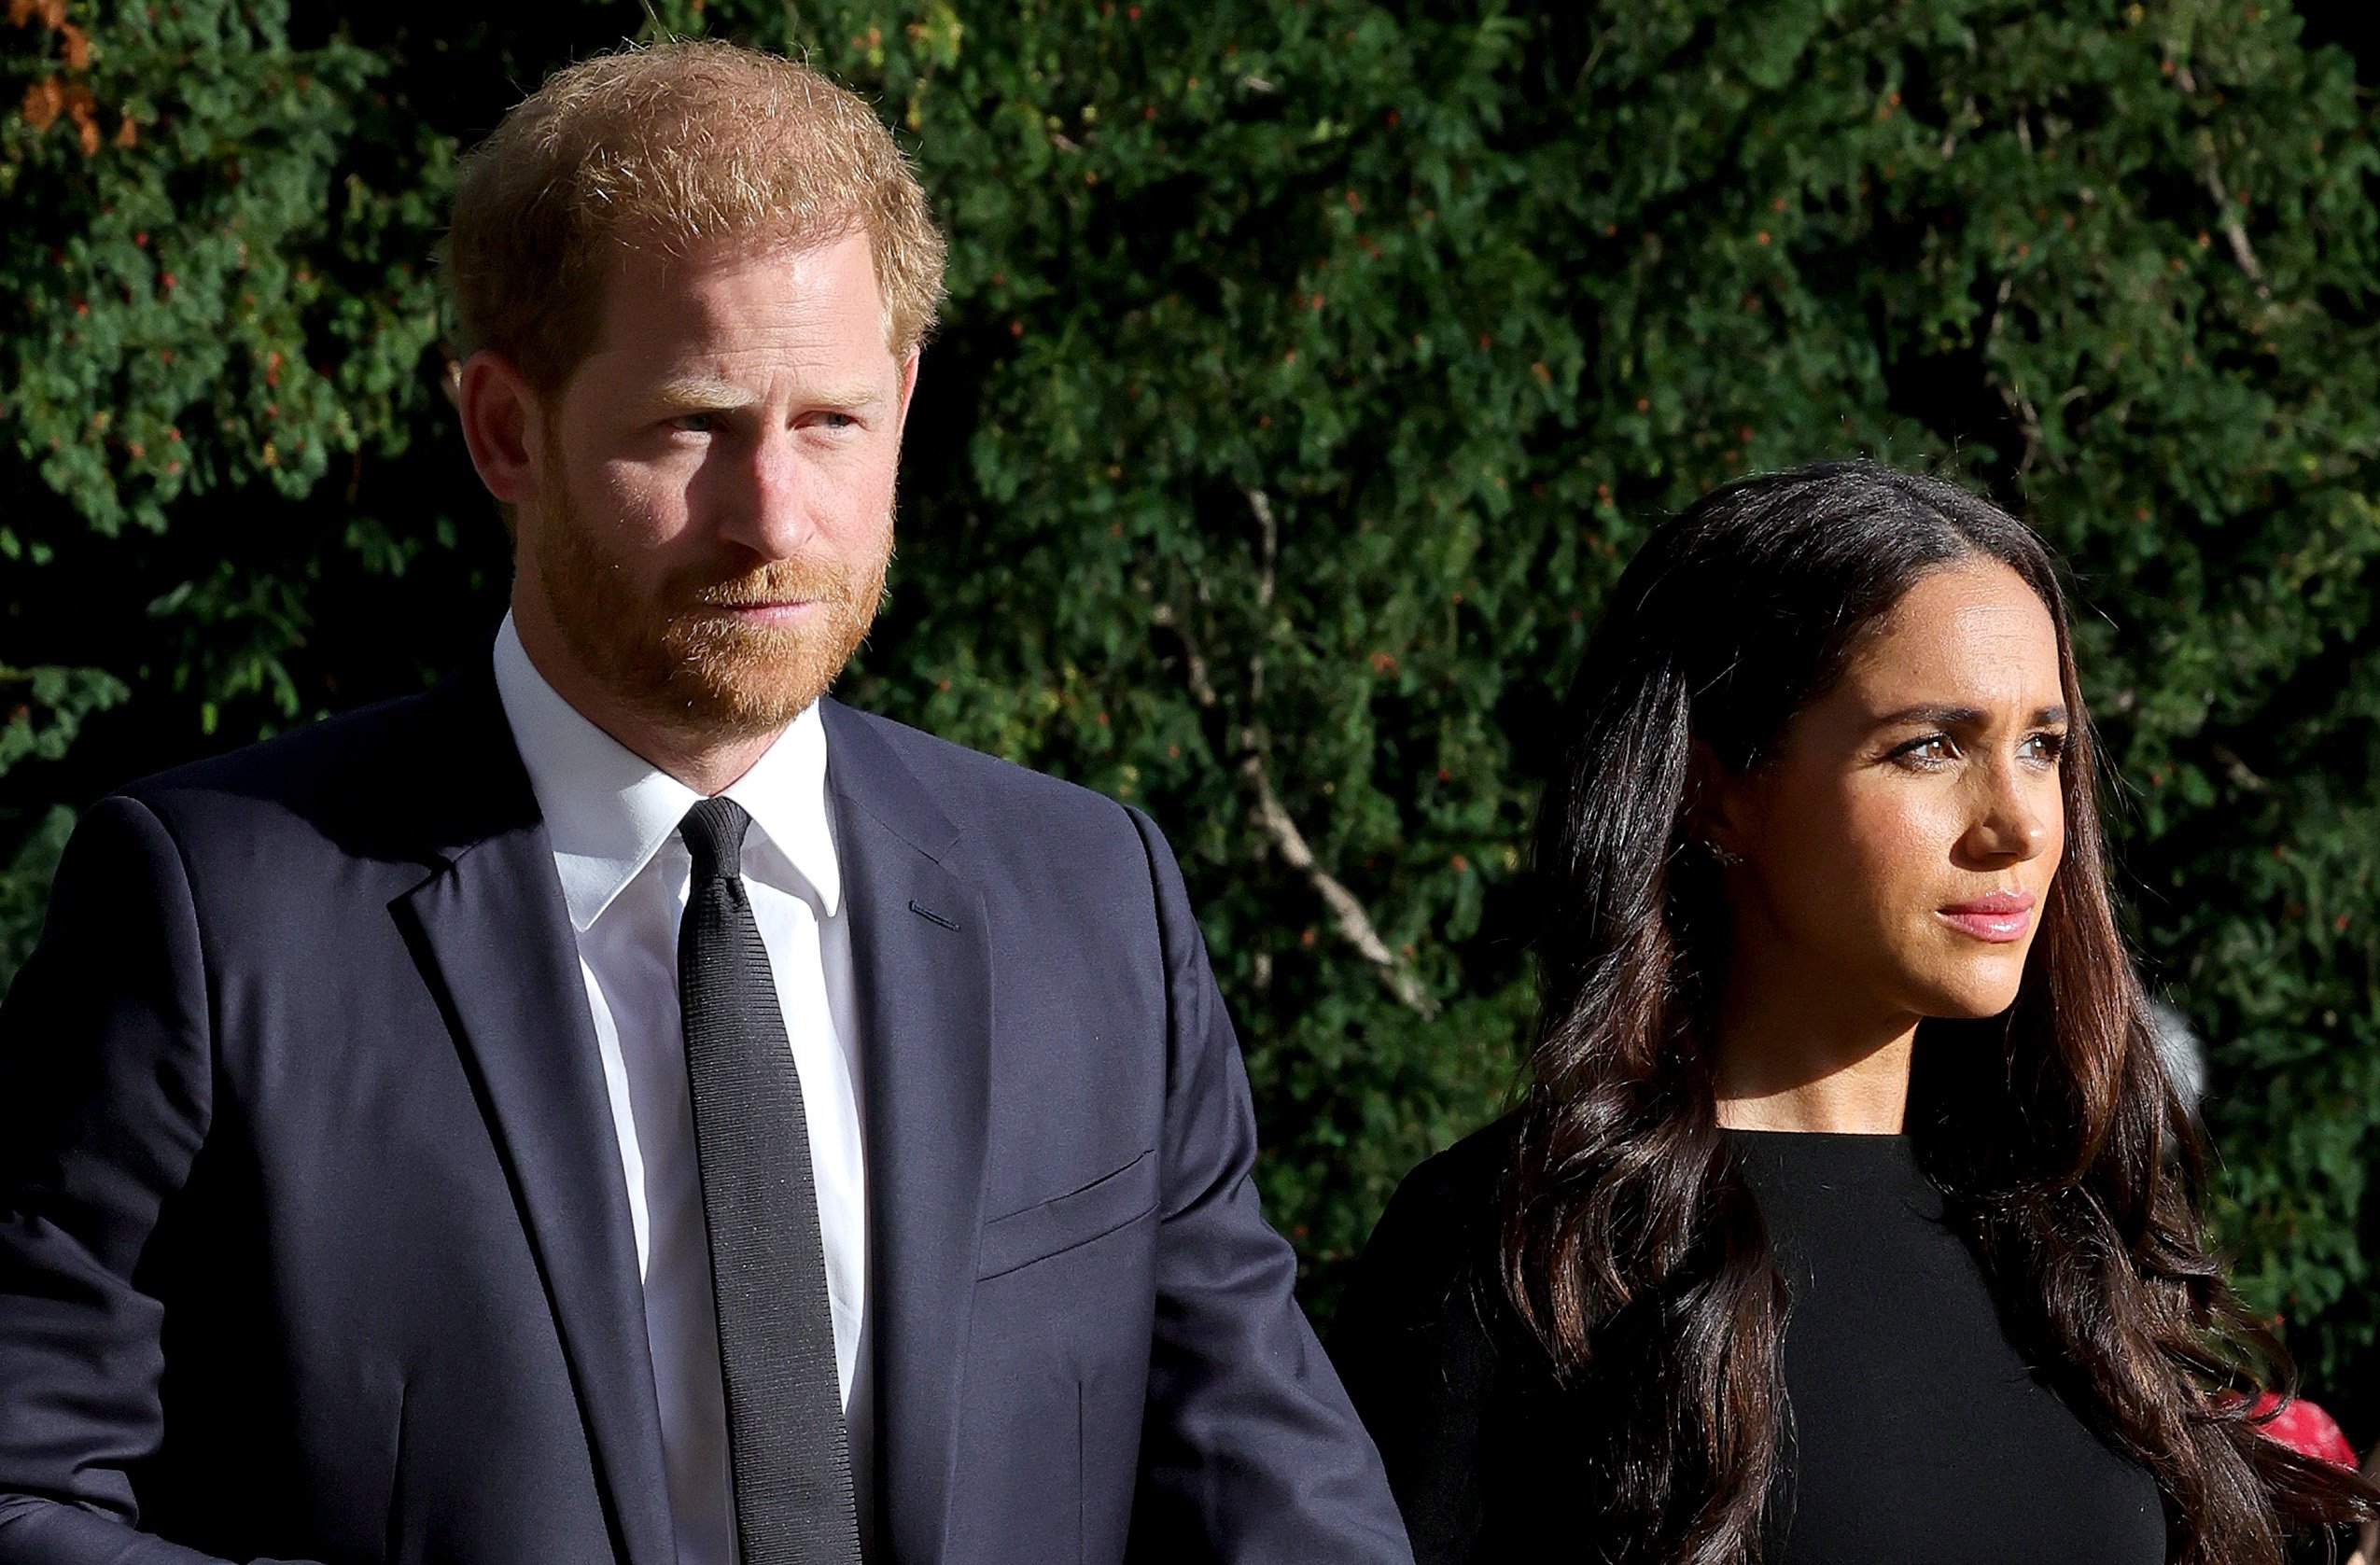 Prince Harry stands next to Meghan Markle.